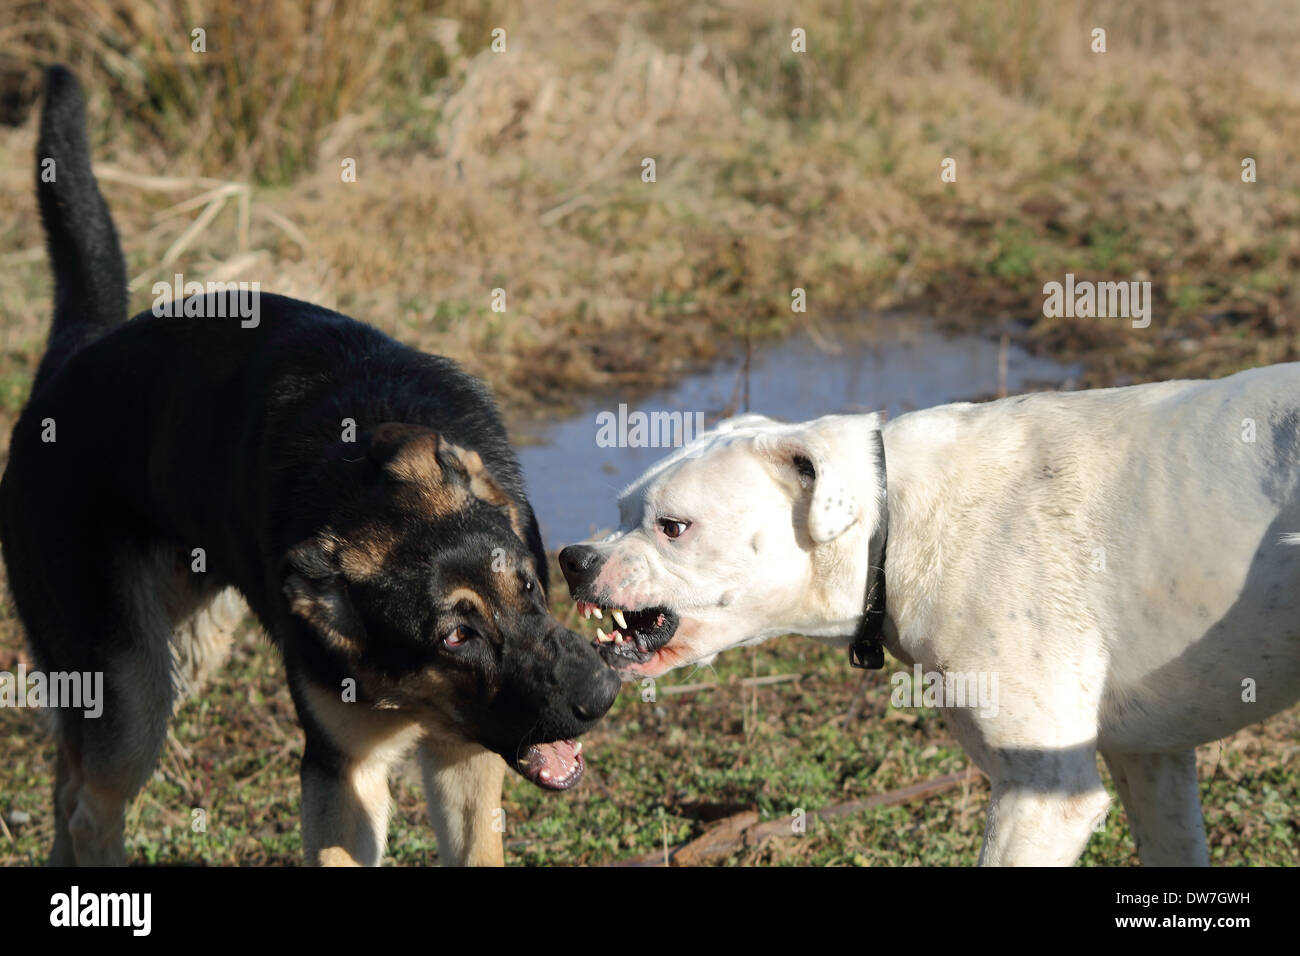 Although this looks vicious, these dogs are friends and were play fighting. Stock Photo